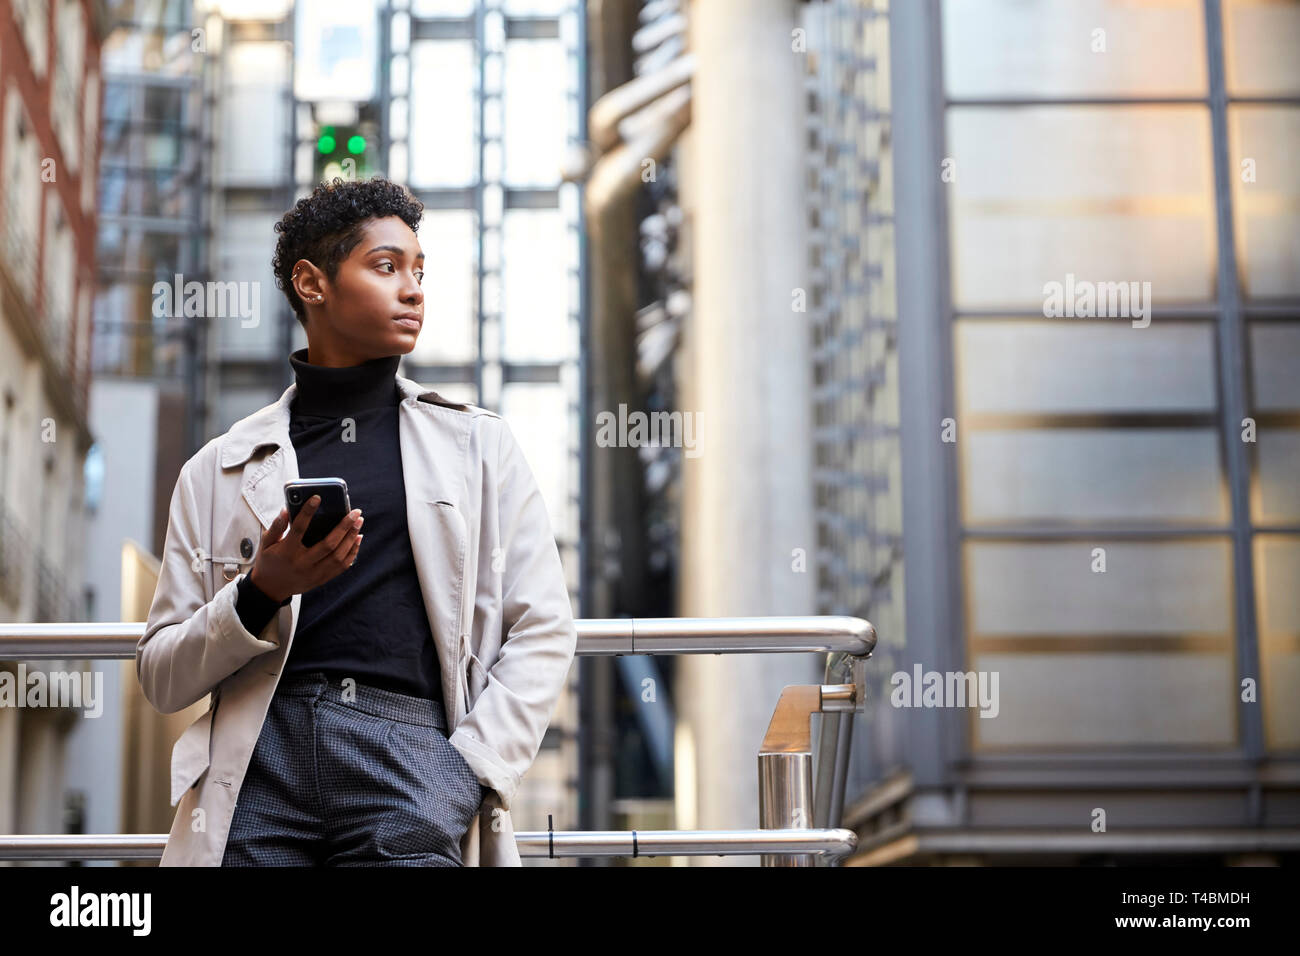 Fashionable young black woman standing in the city holding smartphone, low angle Stock Photo